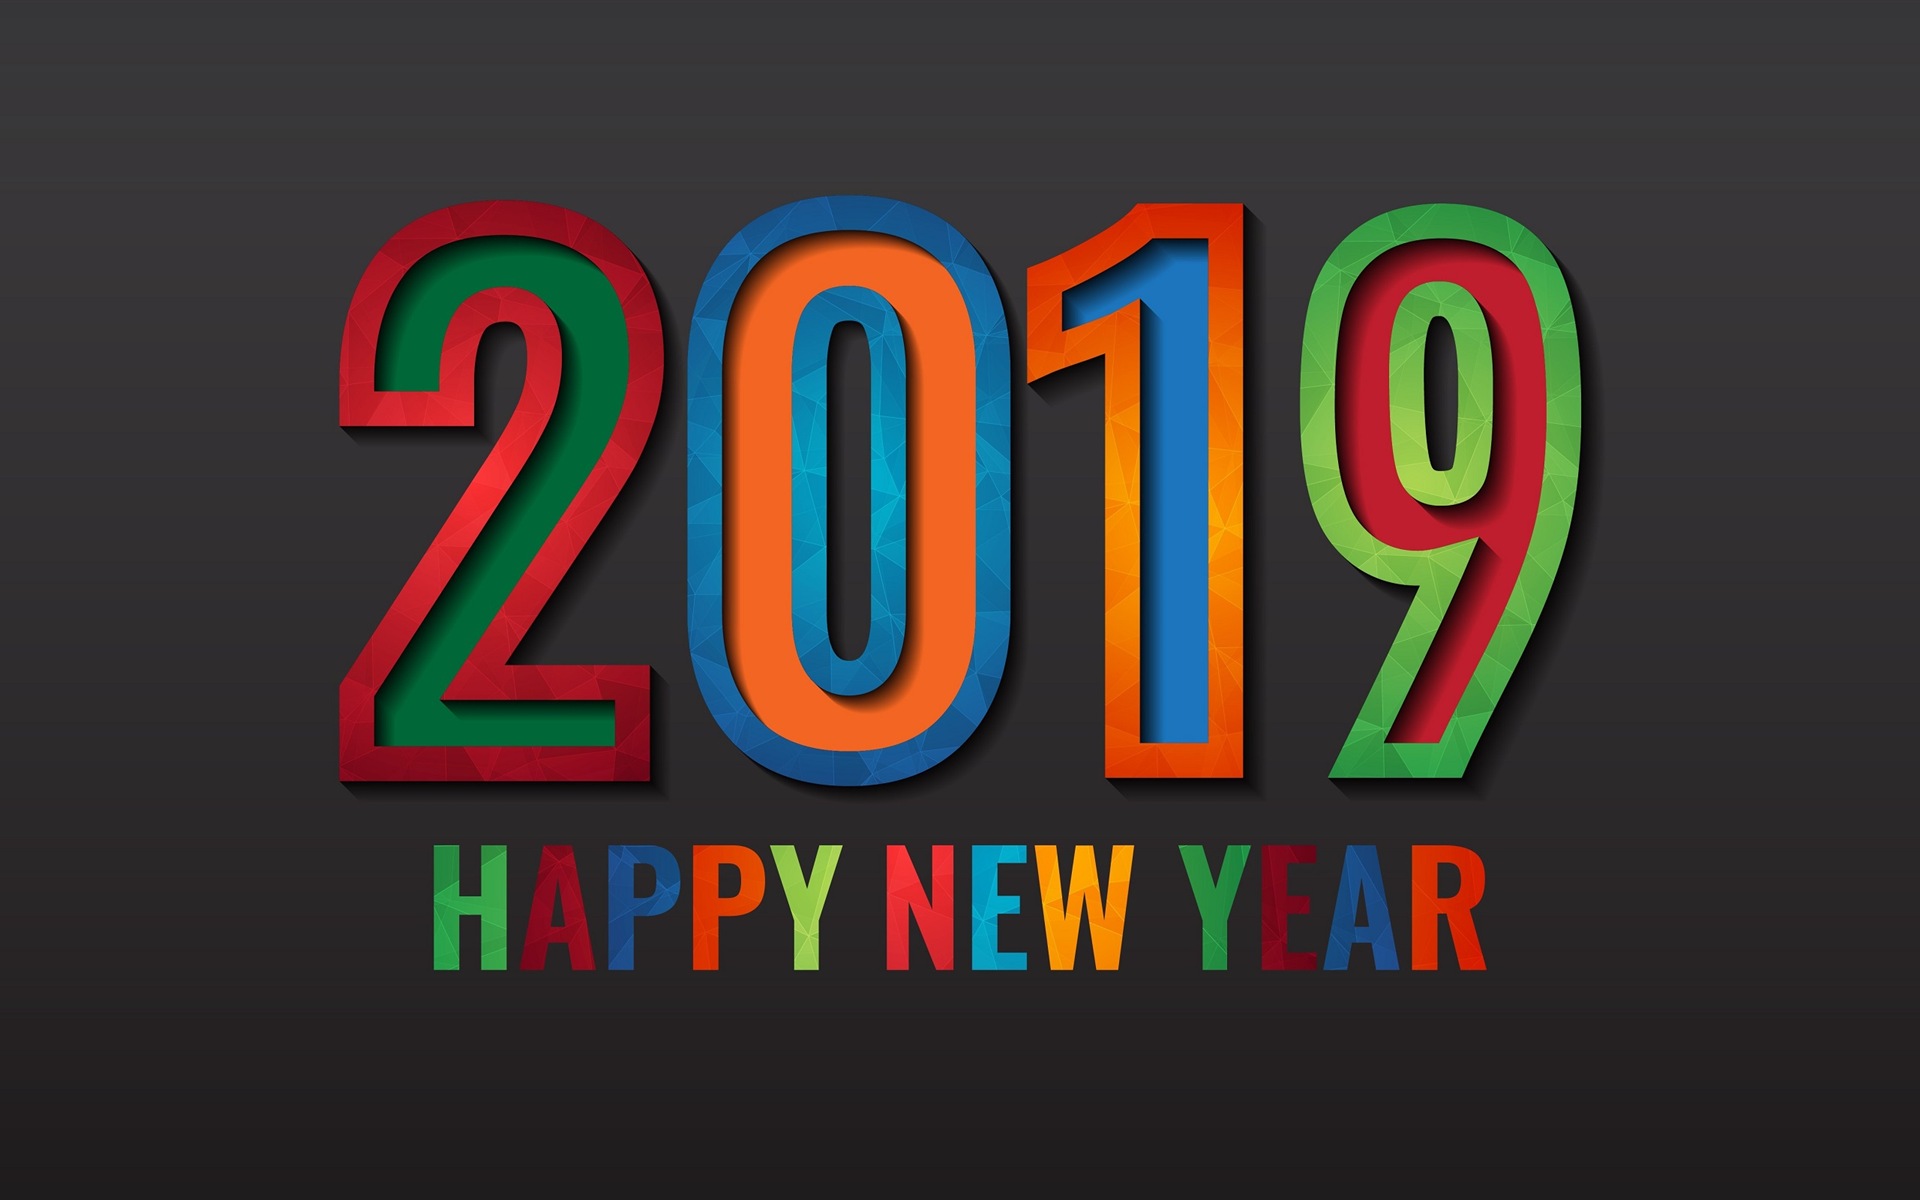 Happy New Year 2019 HD wallpapers #6 - 1920x1200